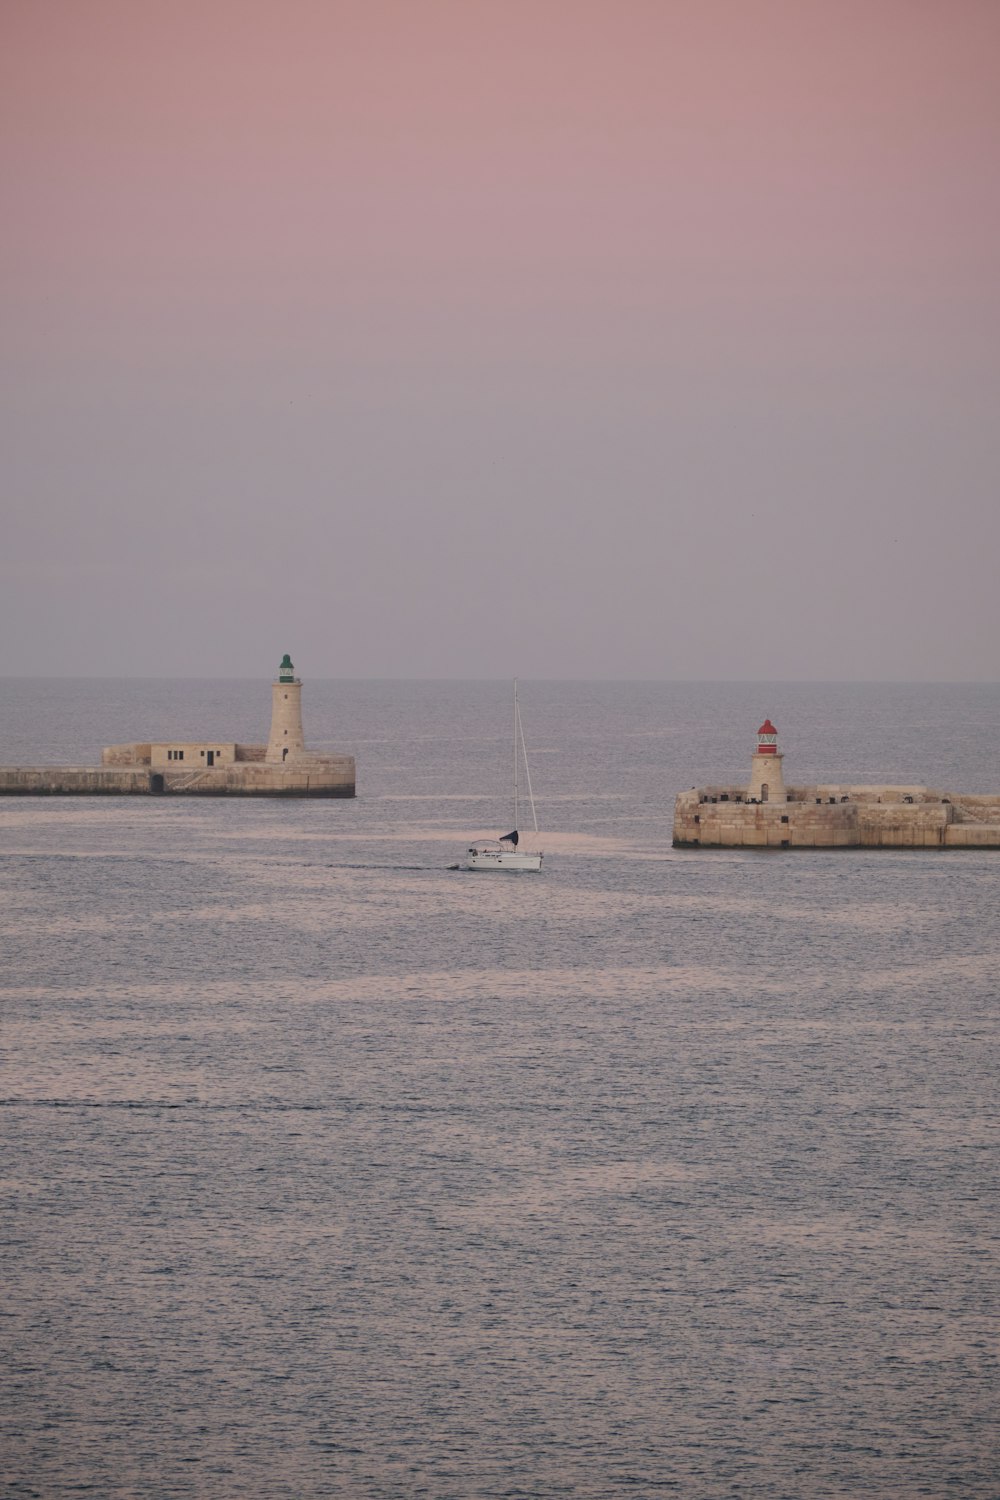 a small boat in the water near a light house